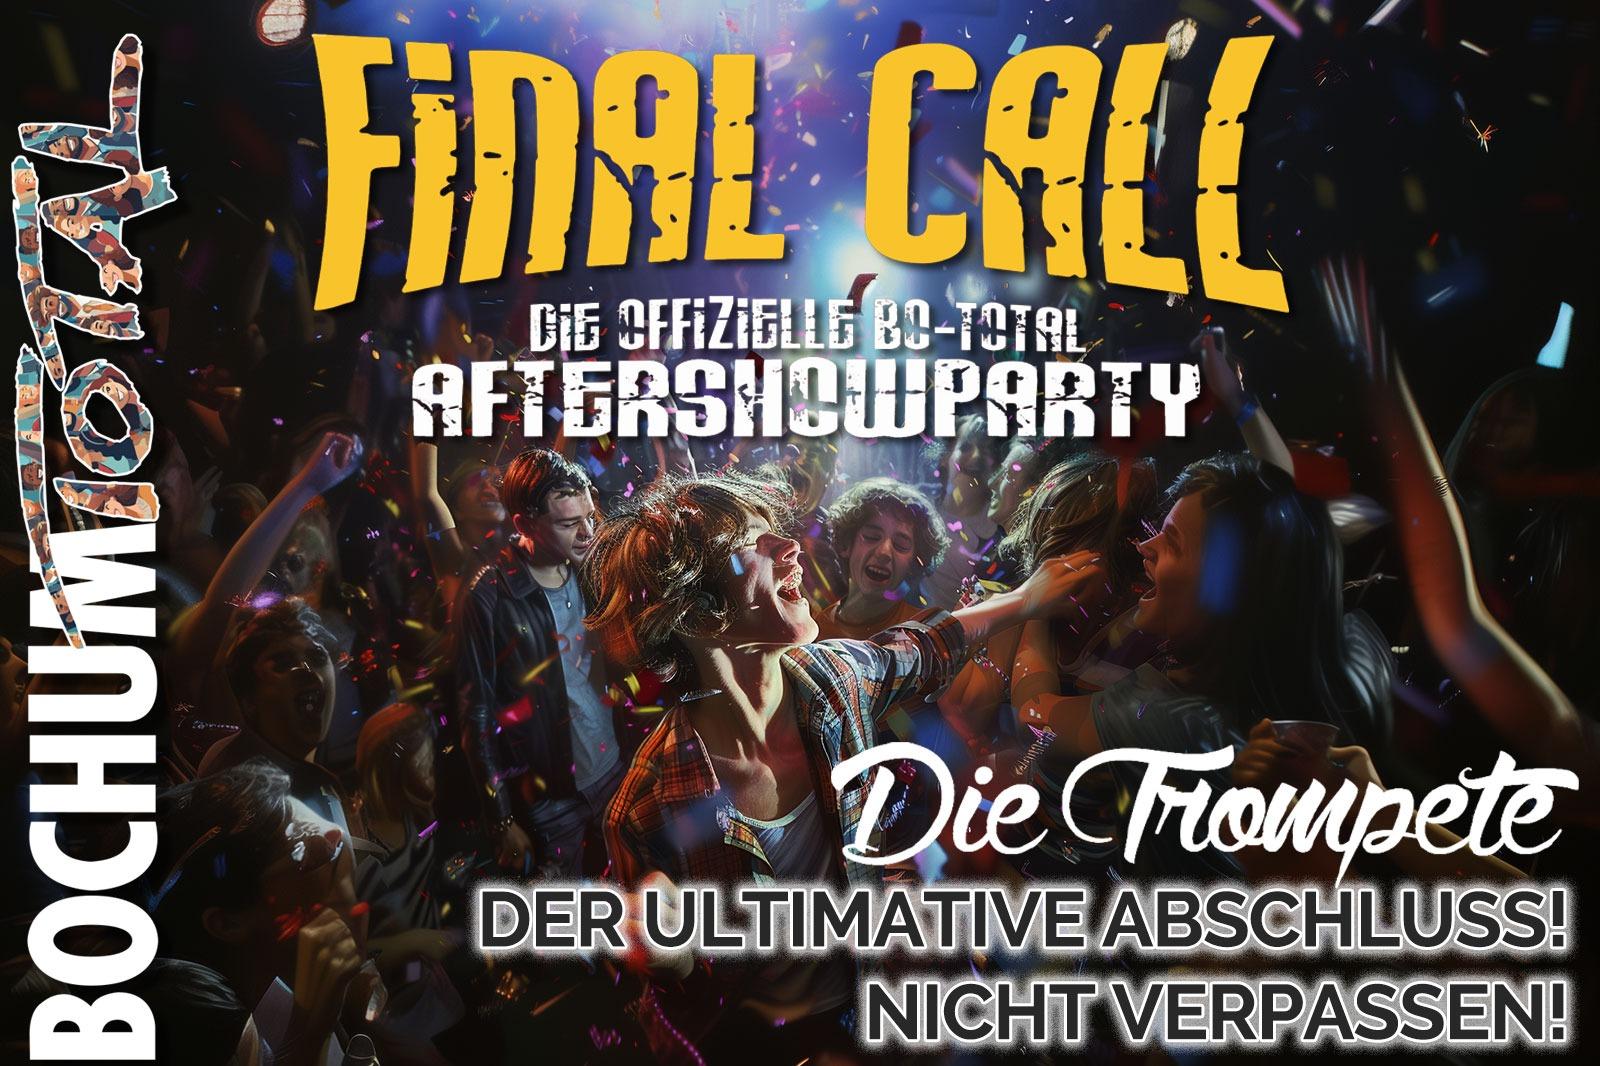 Final Call - Die Bochum Total 2024 Aftershow-Party